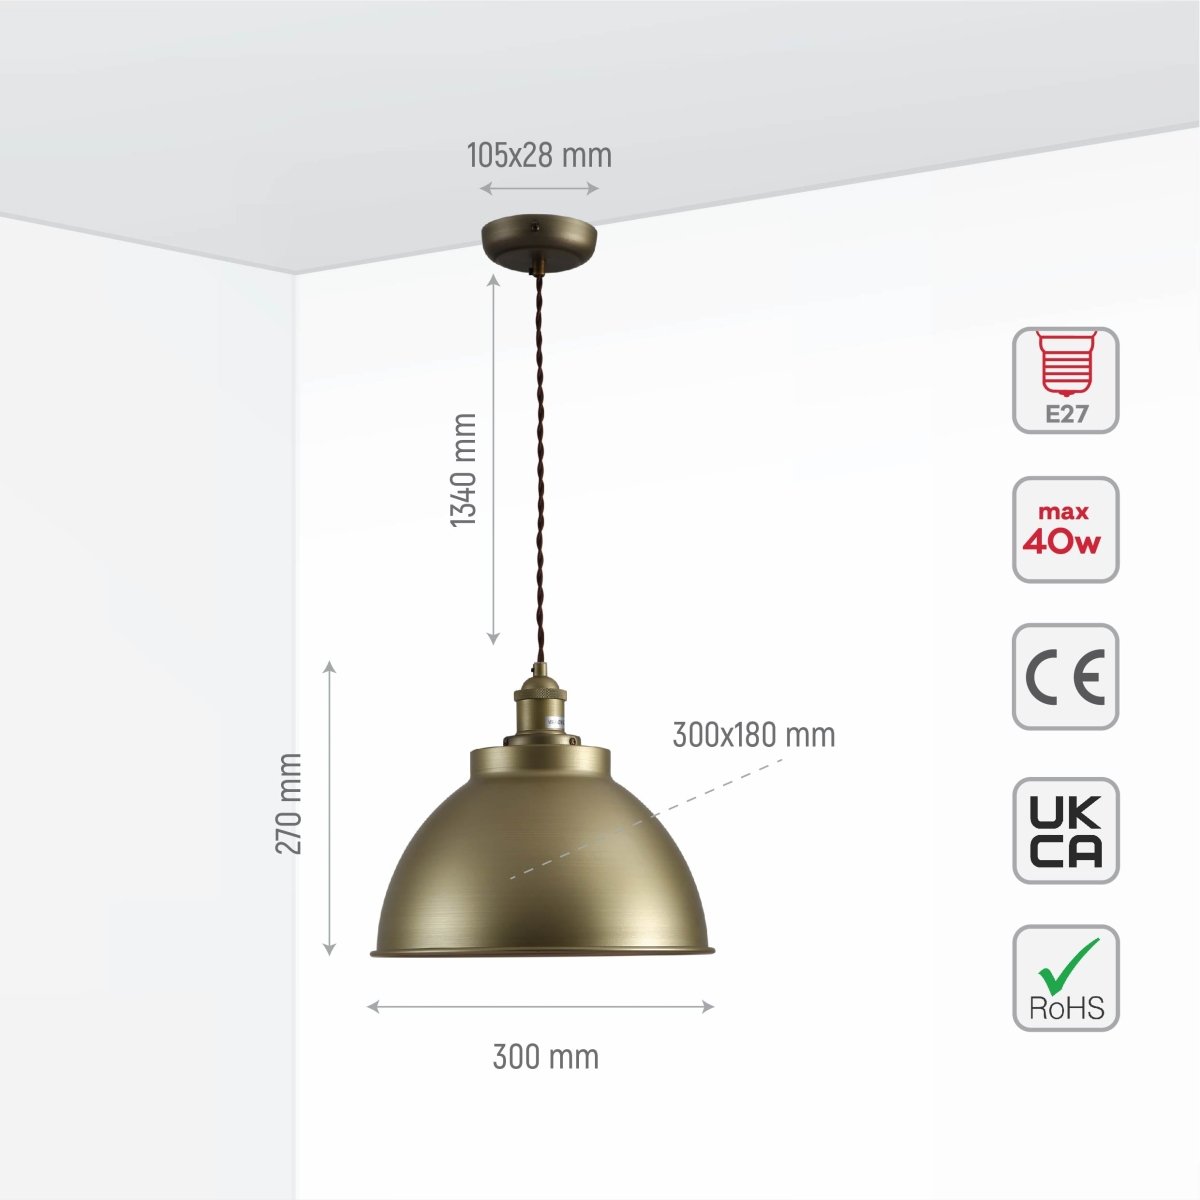 Size and specs of Brooklyn Vintage Metal Dome Pendant Light Pewter Copper  Bronze E27  | TEKLED 150-18207